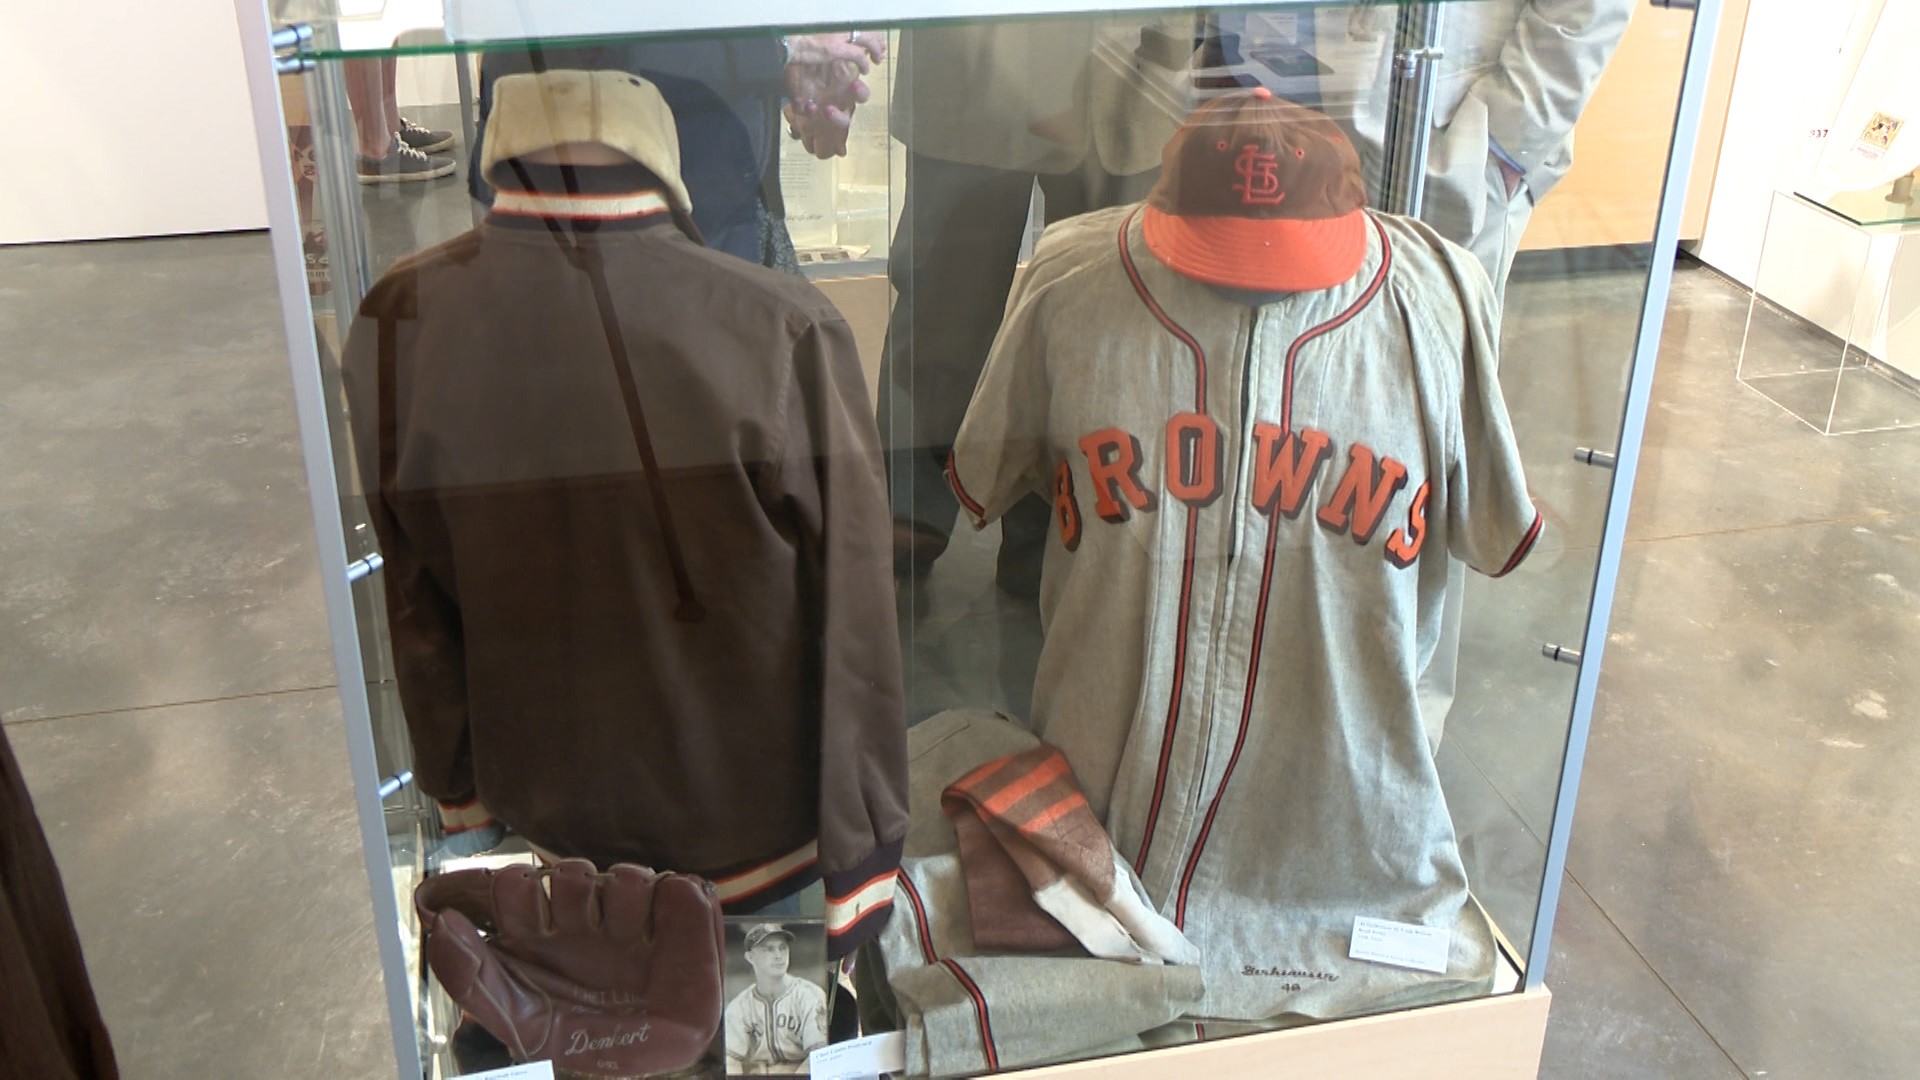 A exhibit honoring the St. Louis Browns opens to the public Saturday at the Eugene Field House south of Busch Stadium. "Rounding the Bases" runs through October.